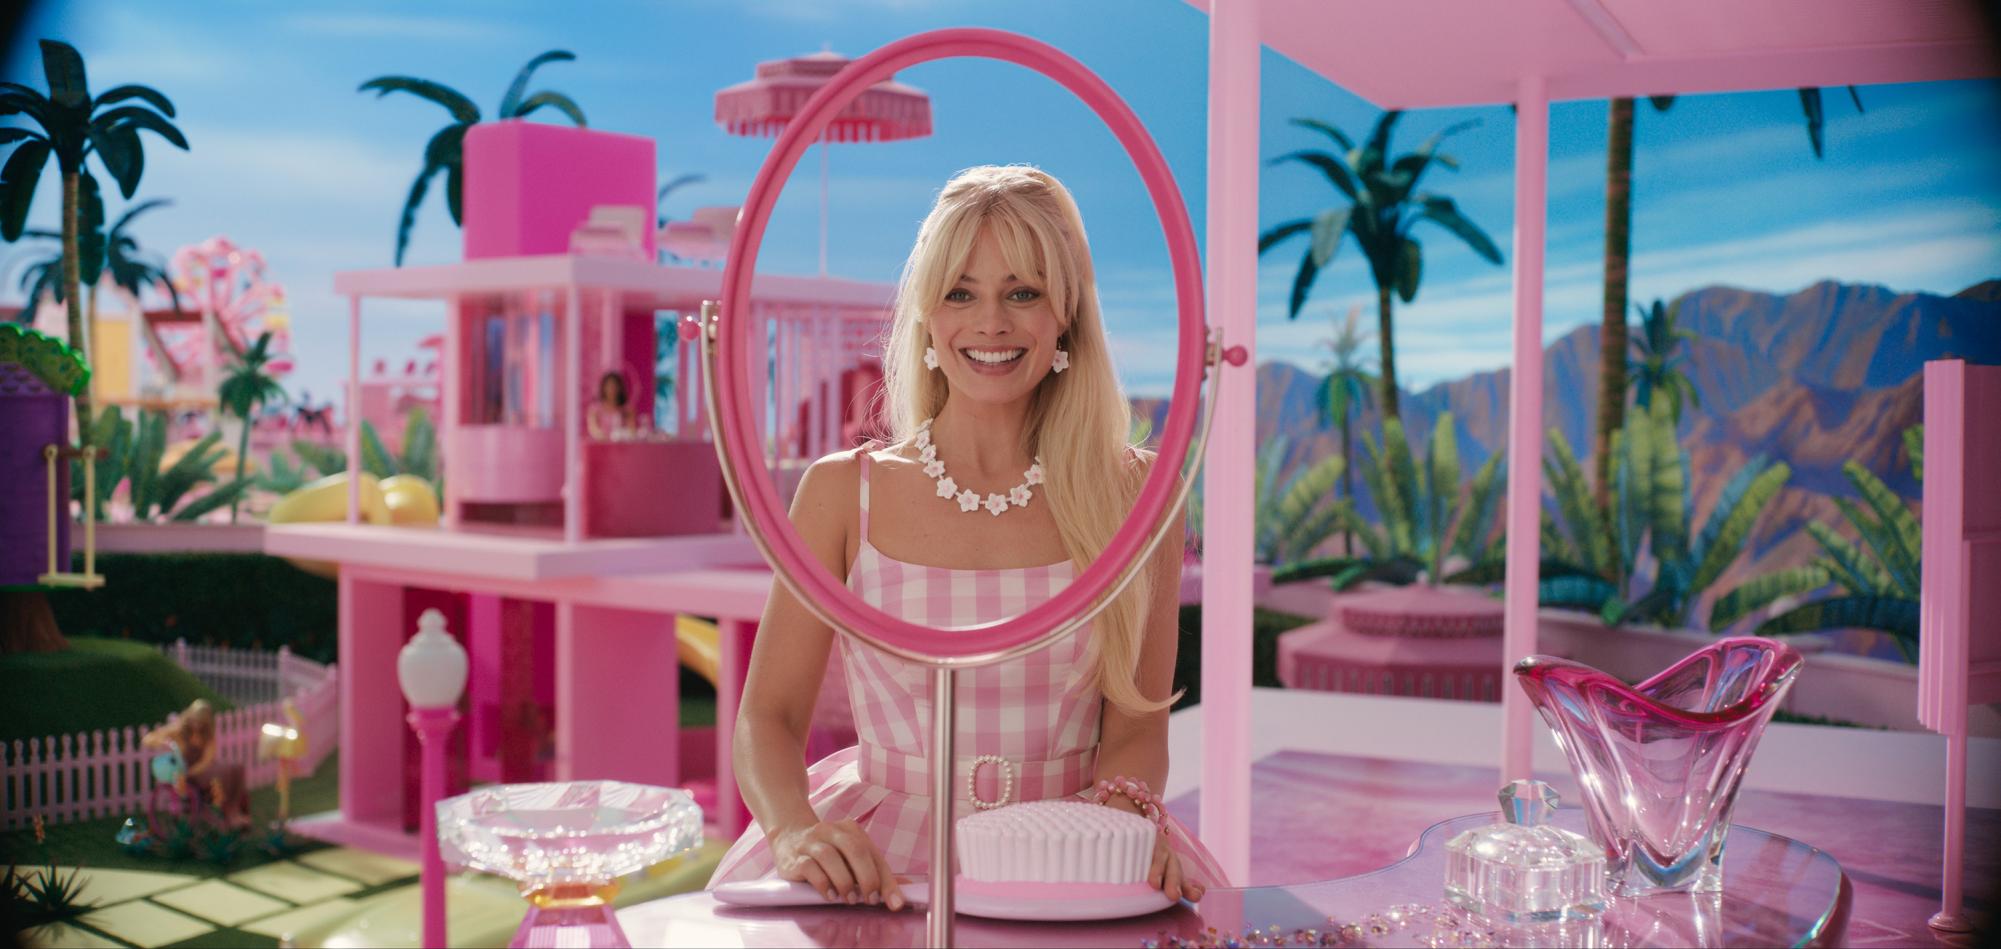 Margot Robbie stars in “Barbie,” which is set to be available on demand in September. Photo permission from Warner Bros. Pictures/TNS.